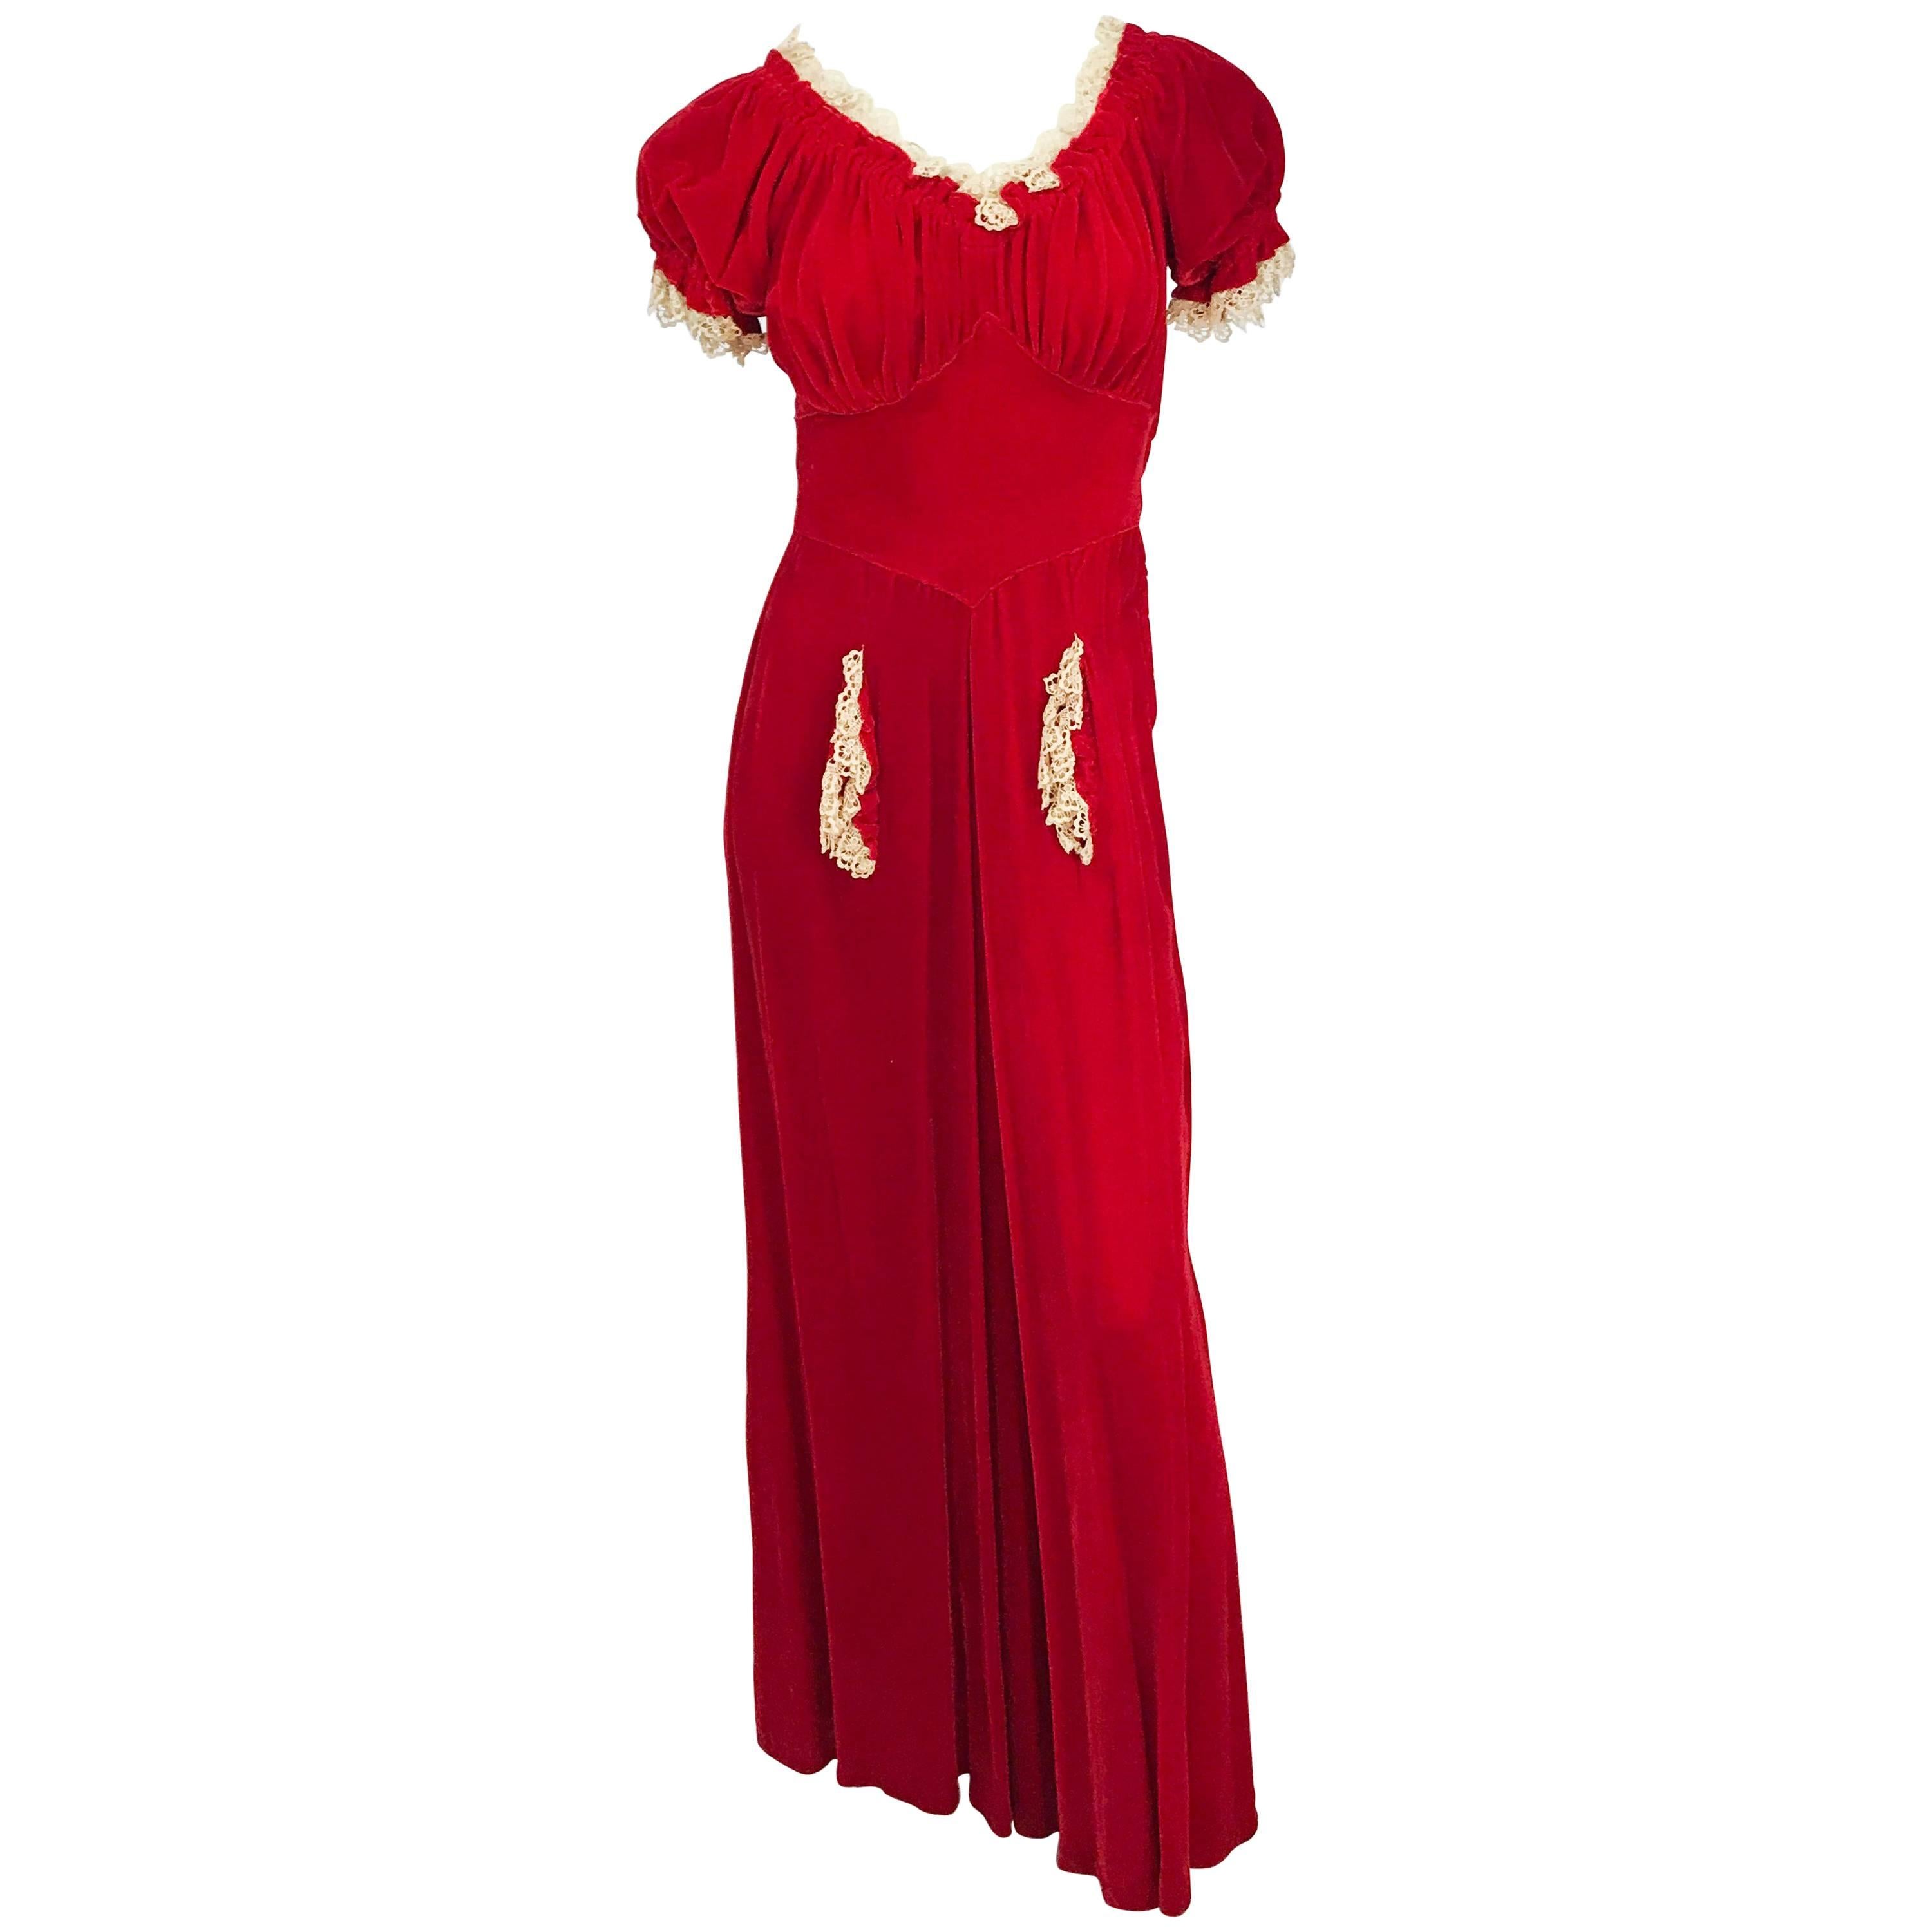 1930s Red Velvet and Lace Bias Cut Dress